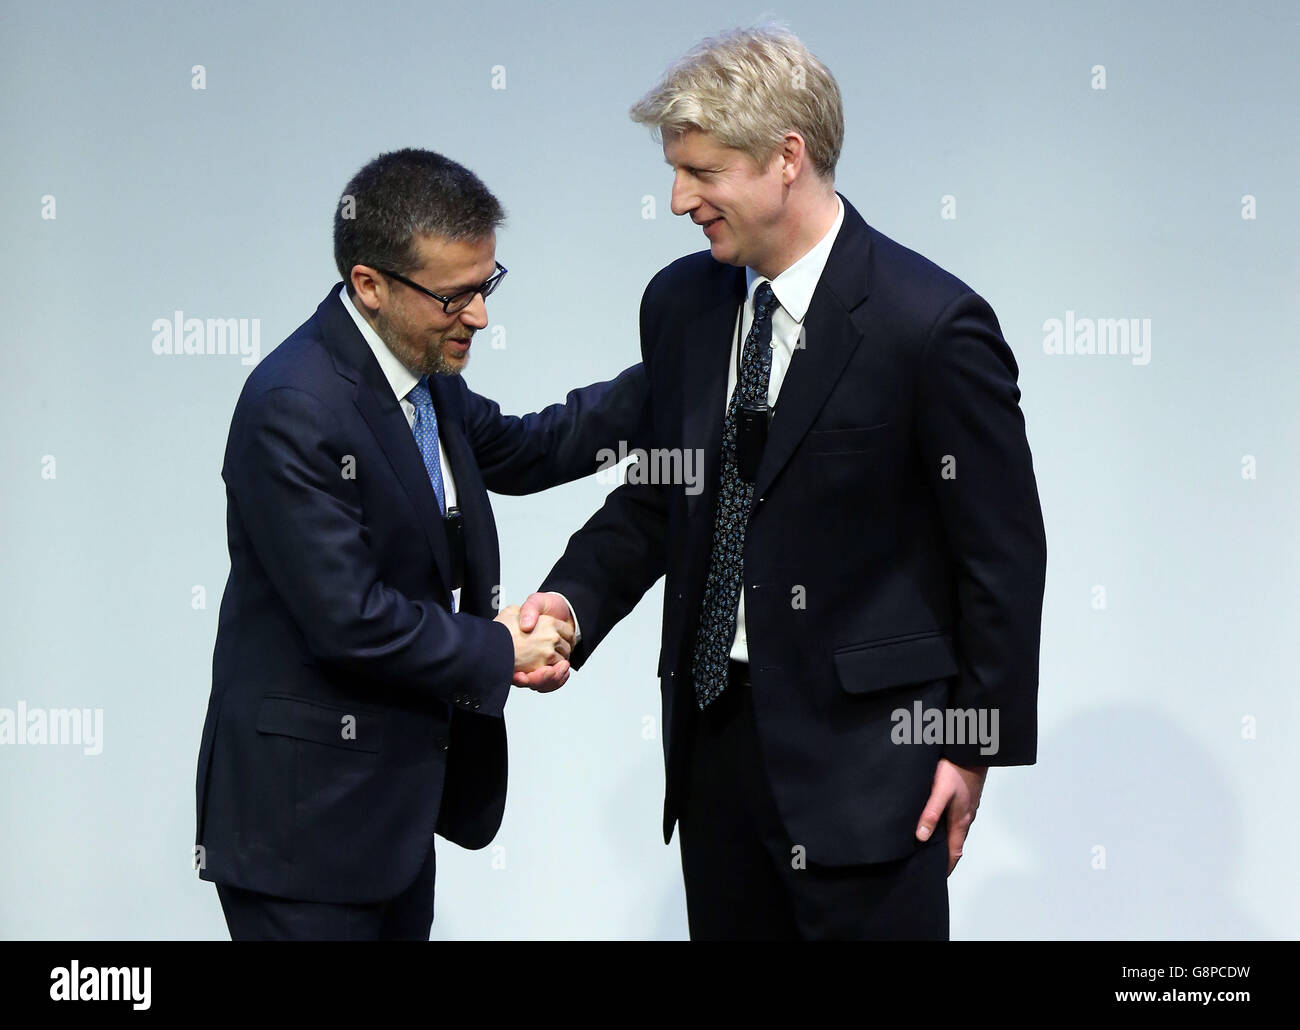 Carlos Moedas EU Commissioner for Research Science and Inovation (left) shakes hands with Universities Minister Jo Johnson, after the minister gave a speech at the Babbage Lecture Theatre, University of Cambridge in Cambridge. Stock Photo